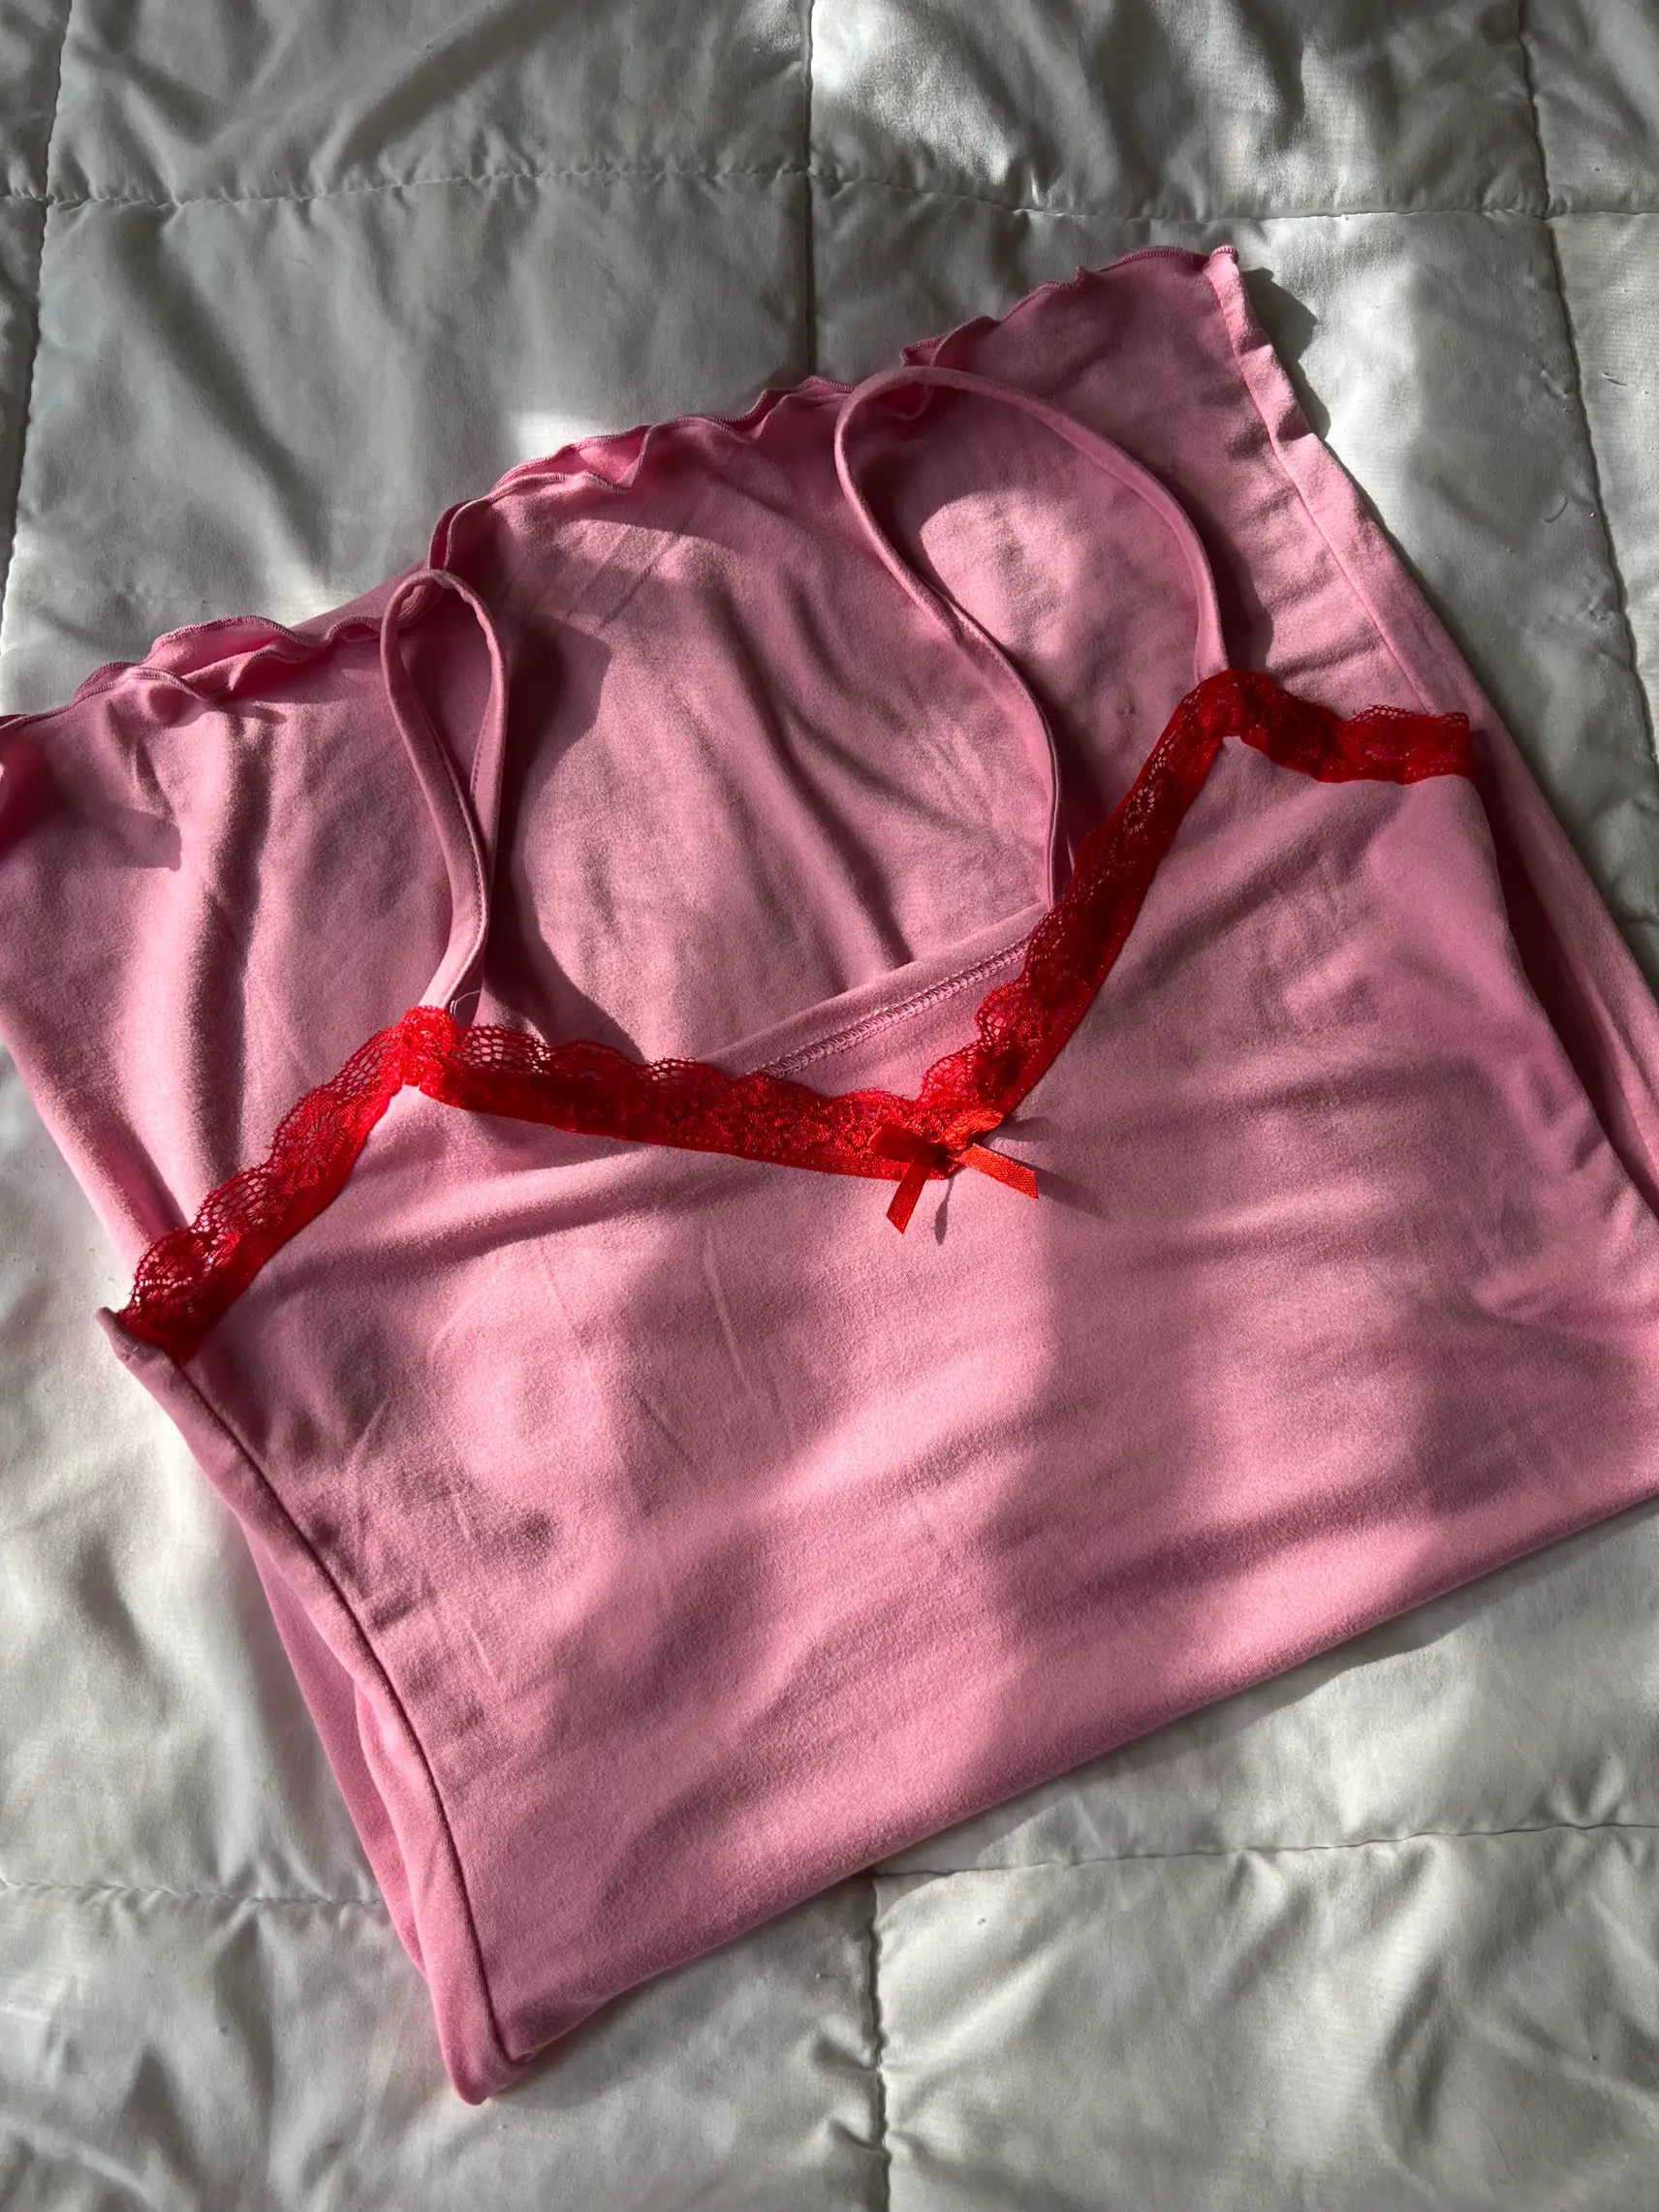 Fit of the day white align tank size 10, wunder under lace luxtreme 25”  size 6, define luon porcelain pink size 6. : r/lululemon